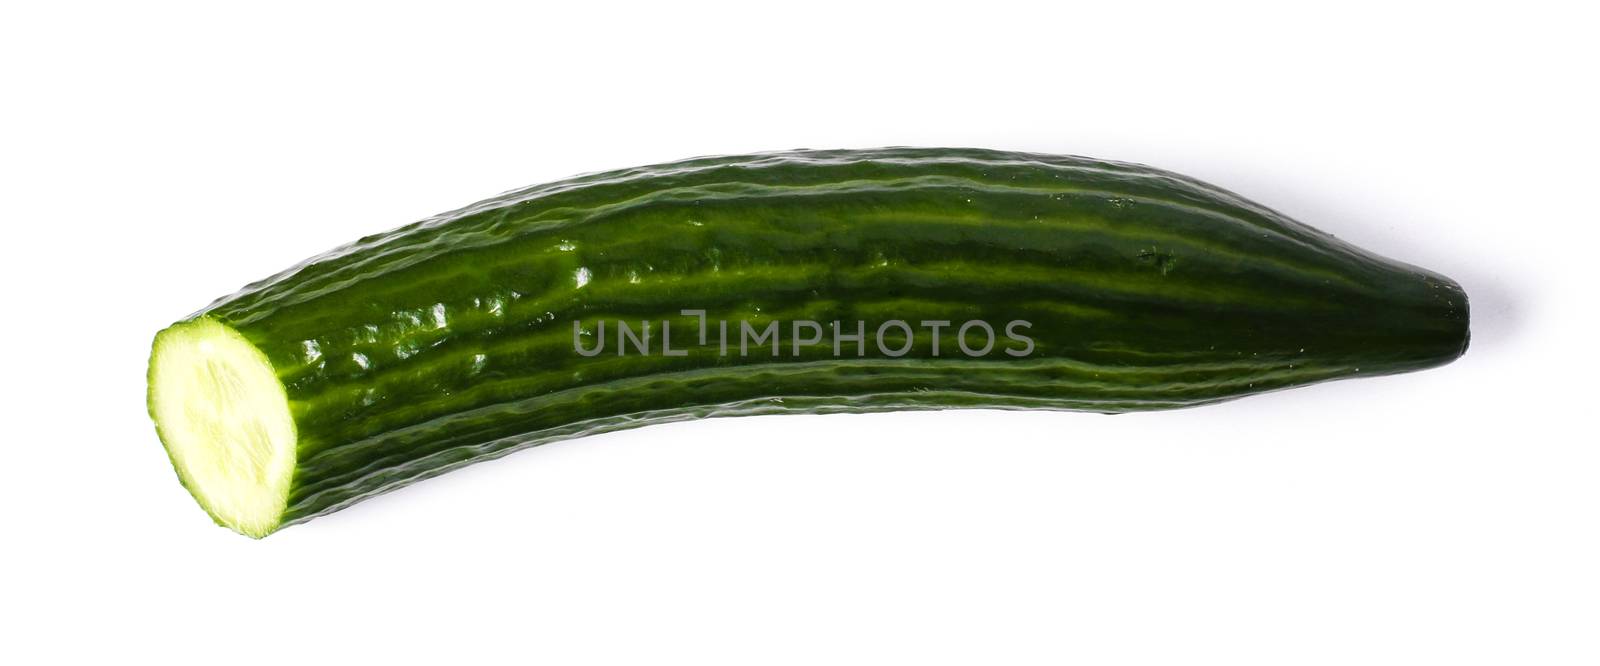 Green cucumber on a white background